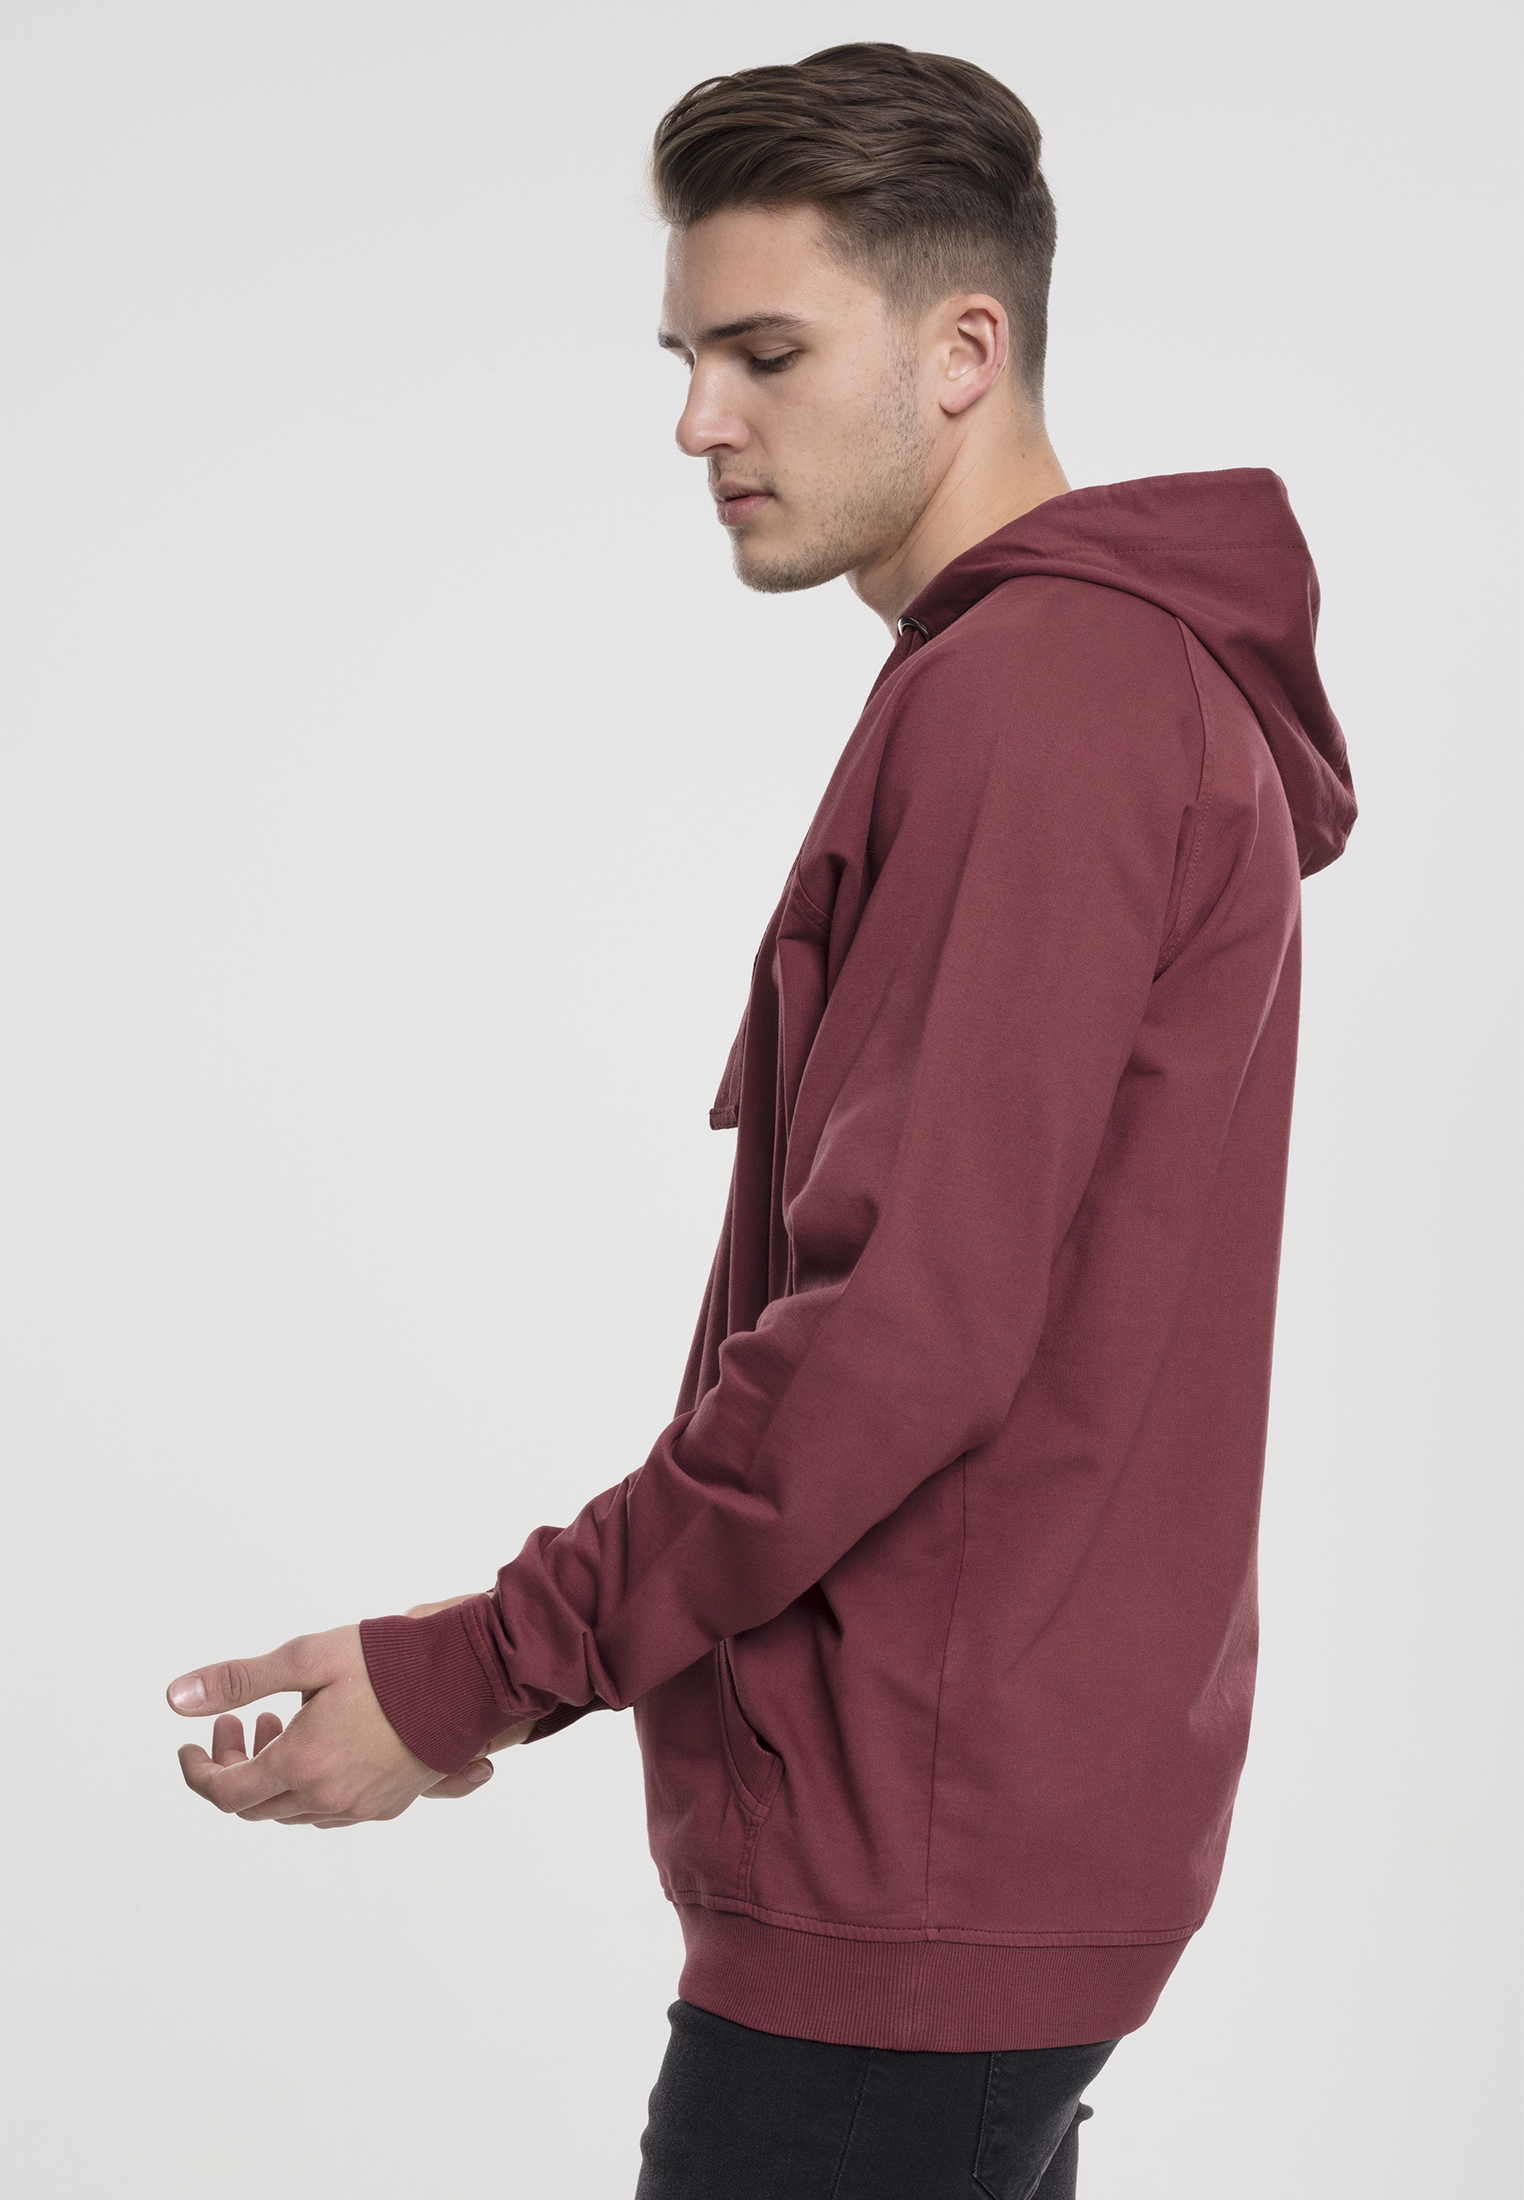 Hoodies Garment Washed Terry Hoody in Farbe rusty